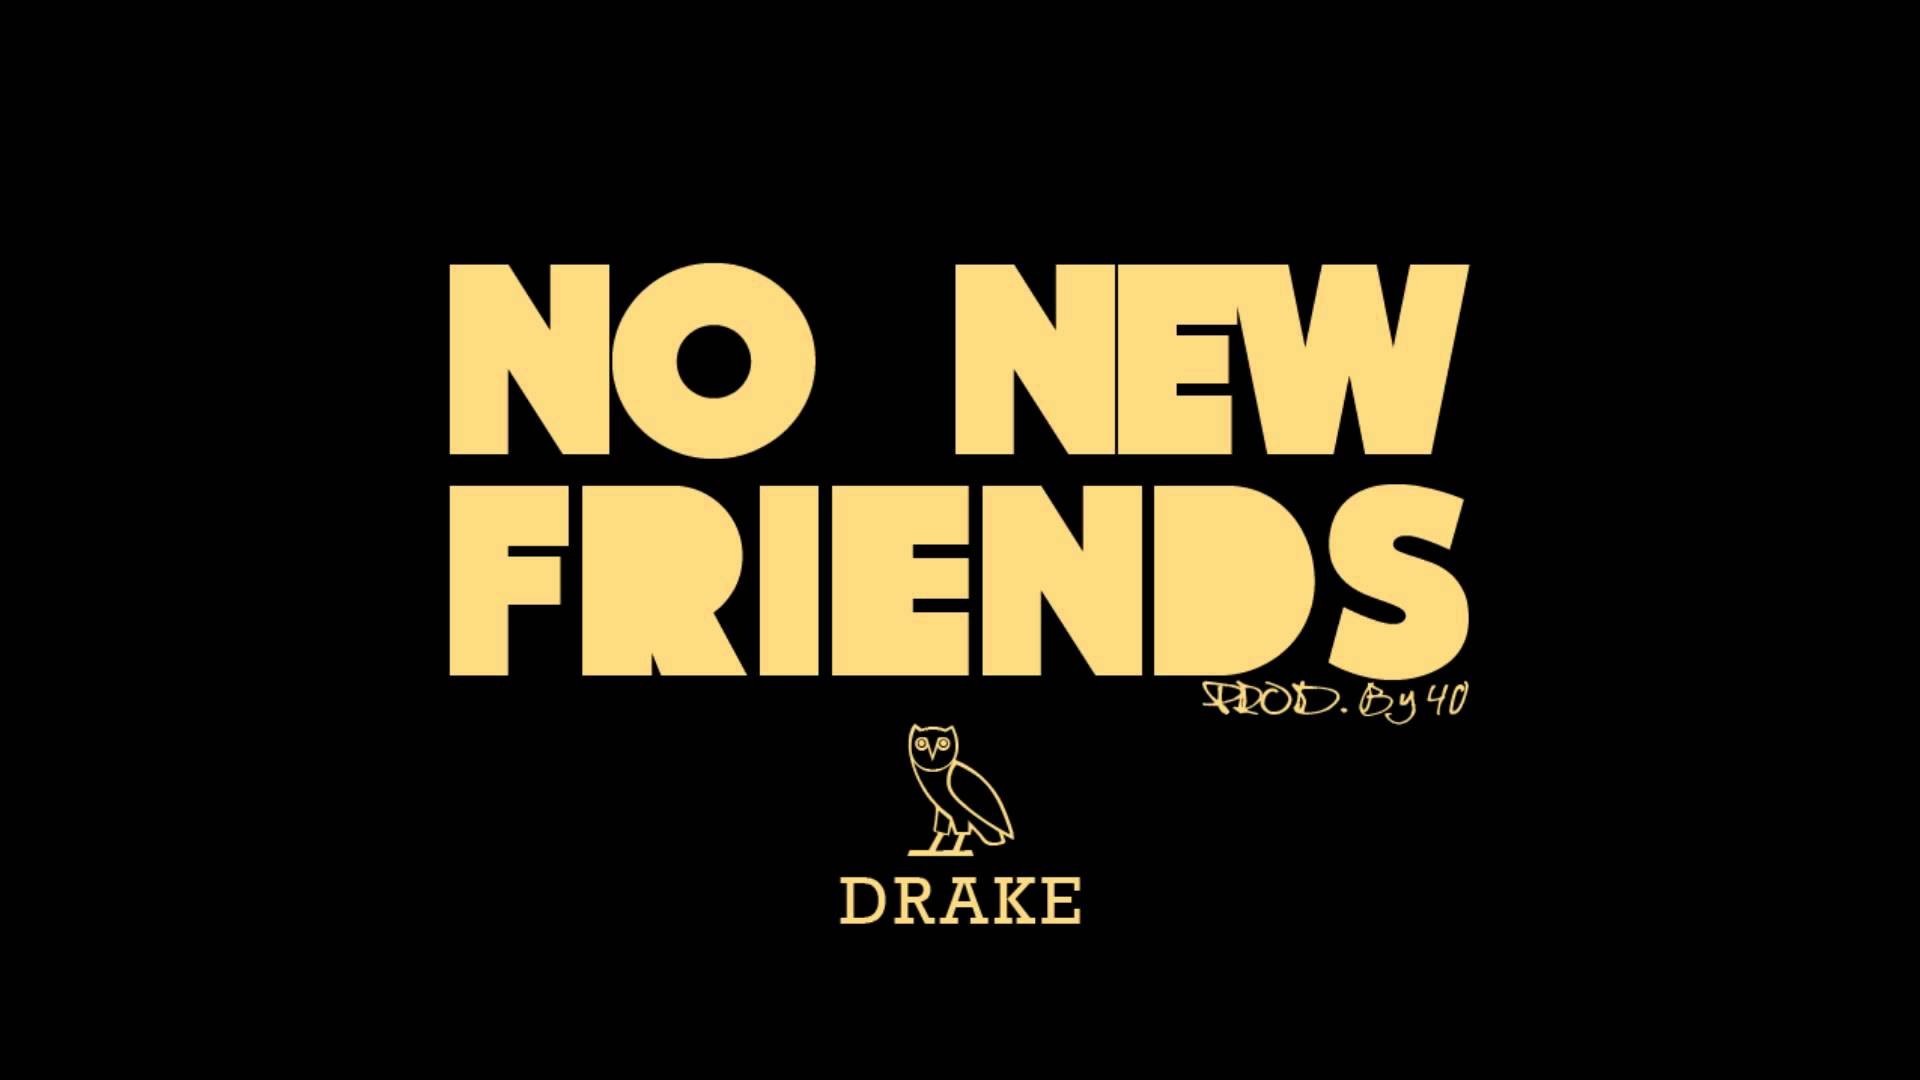 1920x1080 Download Drake No New Friends background for your phone (iPhone .